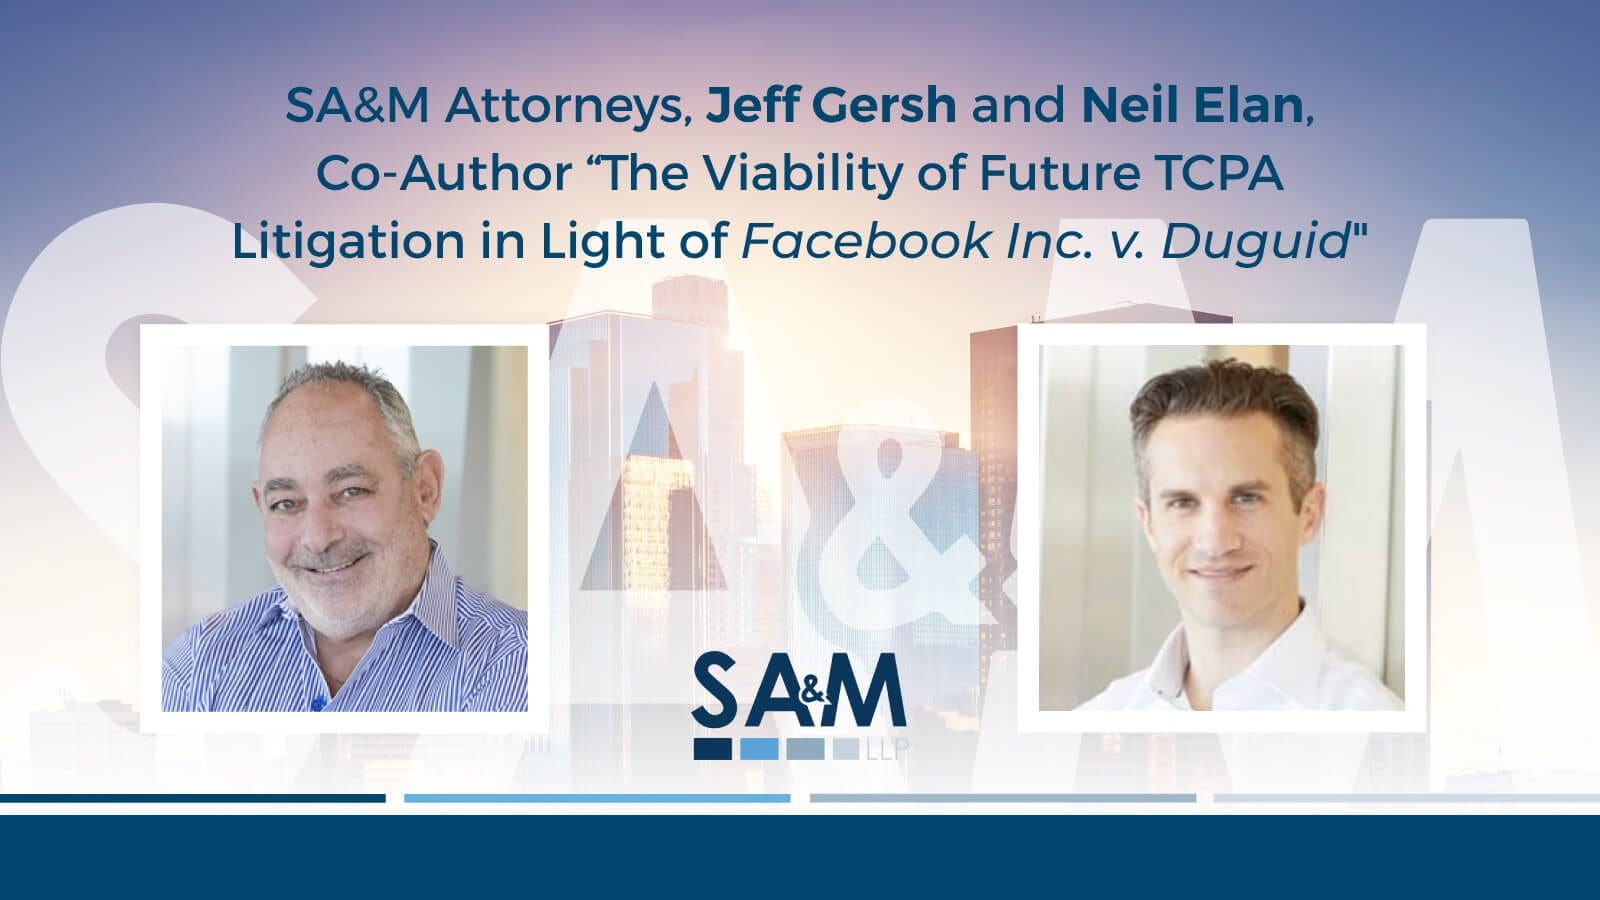 SA&M Attorneys Co-Author “The Viability of Future TCPA Litigation in Light of Facebook Inc. v. Duguid